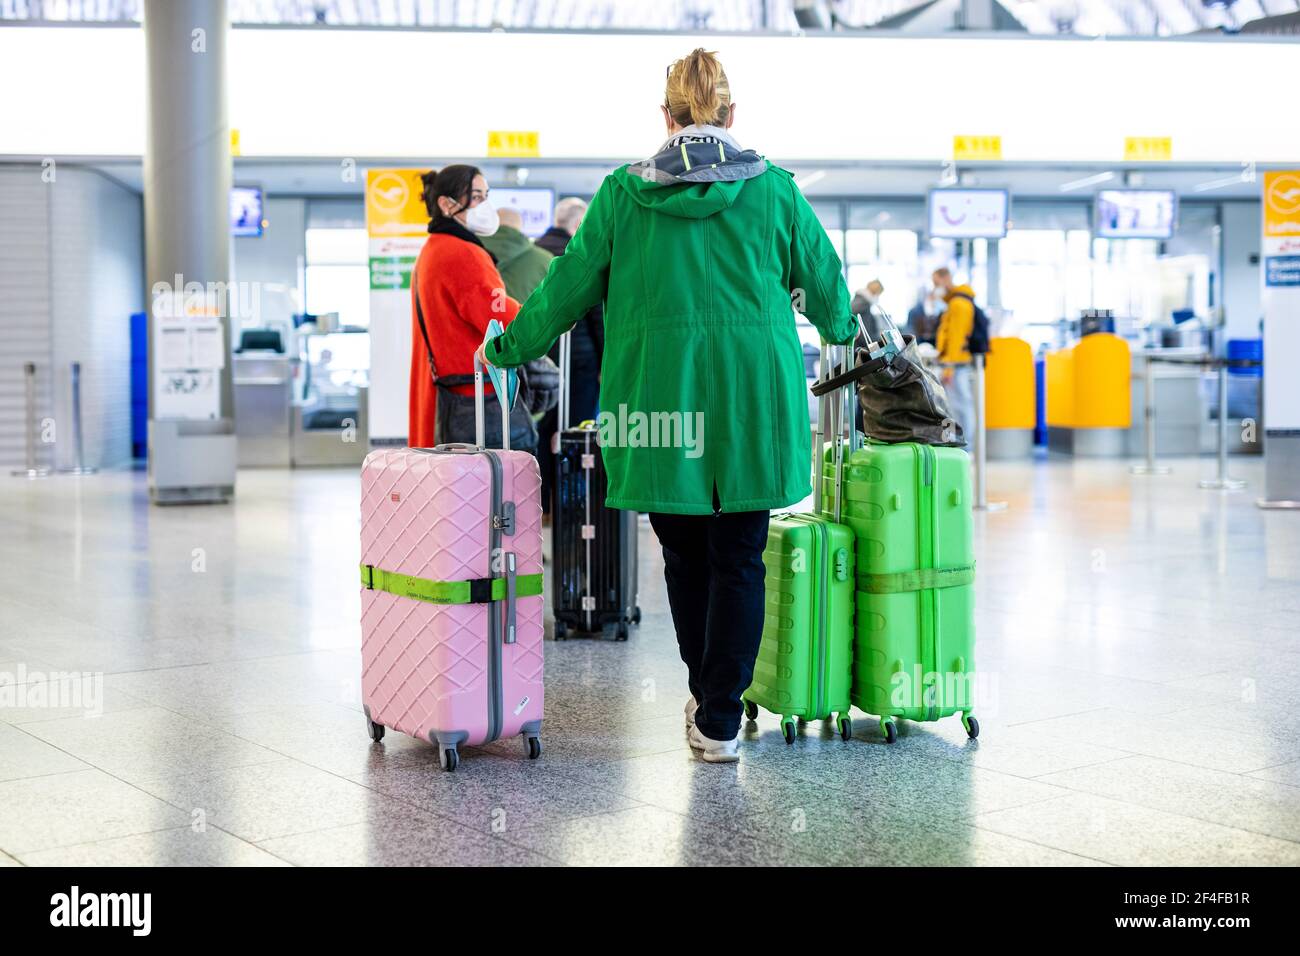 Hannover Airport Terminal Building High Resolution Stock Photography and  Images - Alamy